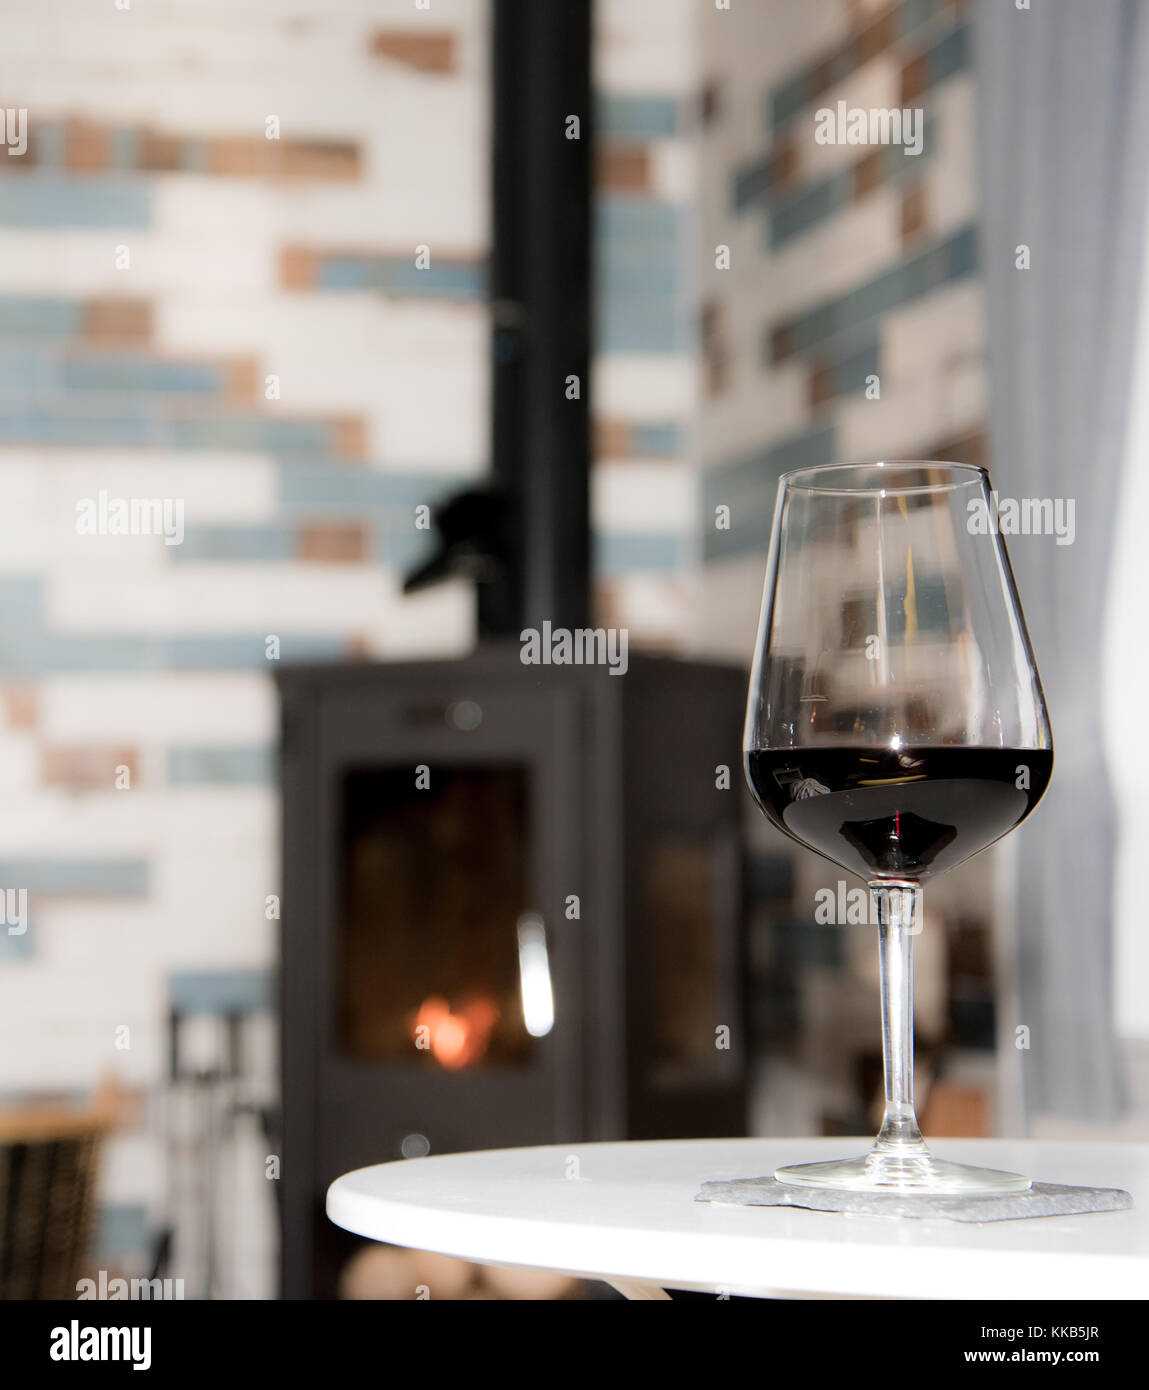 Glass of red wine and fire in stove - romantic living room scenery Stock Photo